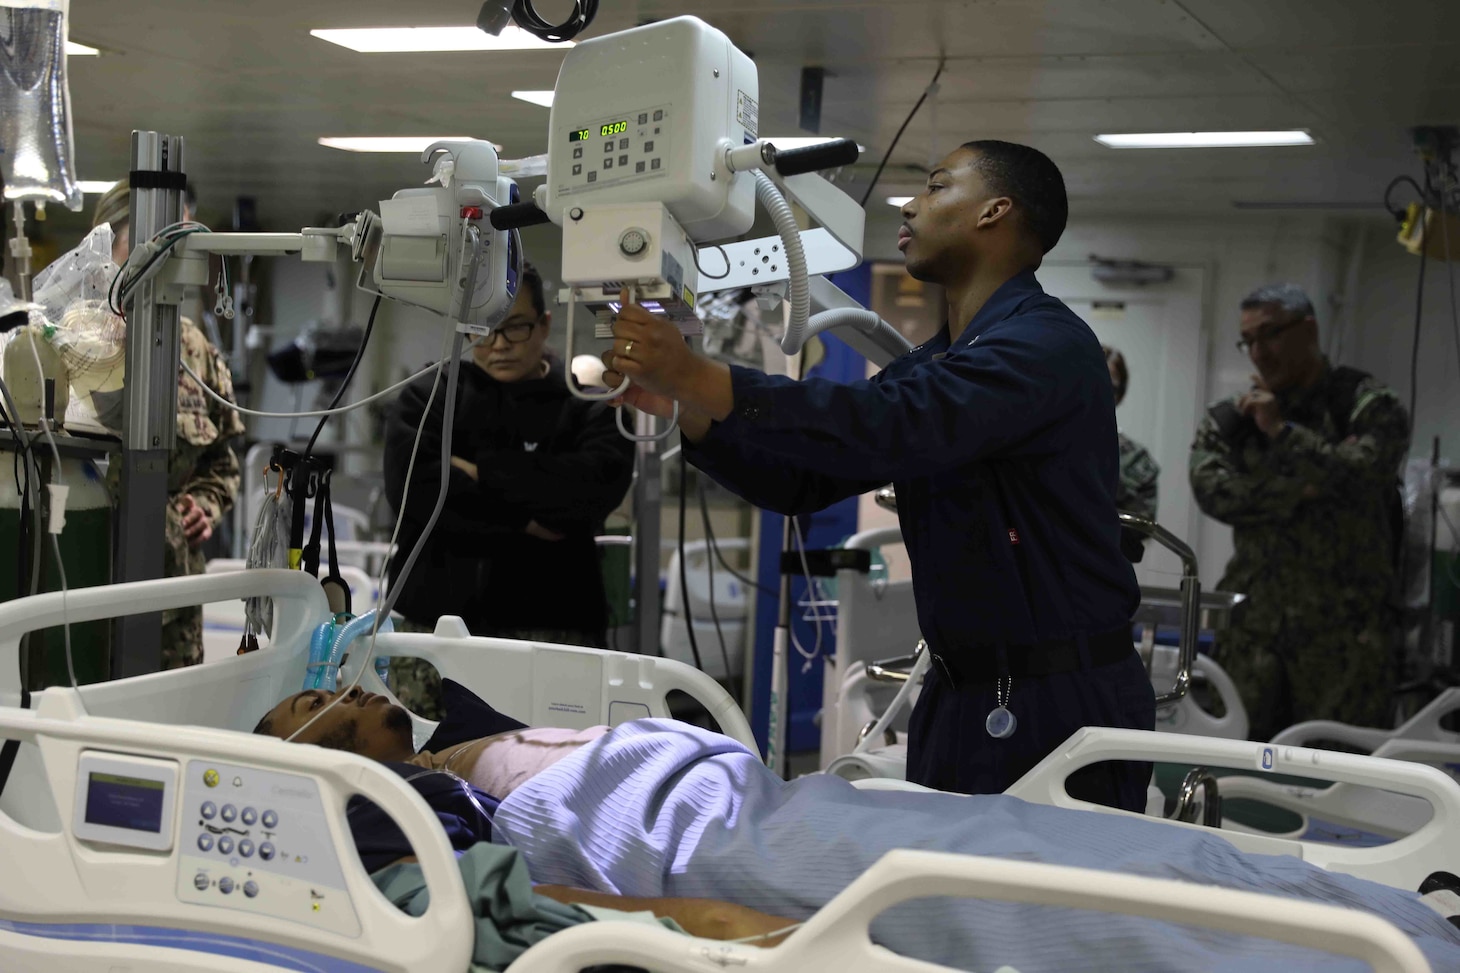 NORFOLK, Va. (Feb. 16, 2023) Hospital Corpsman 3rd Class Devon Fontenot (right) and Hospital Corpsman 2nd Class Stephanie Fallon, both assigned to the wasp-class amphibious assault ship USS Bataan (LHD 5) Medical Department, perform a simulated x-ray on Hospital Corpsman 2nd Class Farrie Jalin as part of a pier-side trauma training exercise, Feb. 16, 2023. The medical exercise was conducted as part of a Naval Medical Forces Atlantic and U.S. Fleet Forces Command-driven effort to align with and support fleet and joint requirements, and to improve deployment readiness of organic fleet medical departments. During the evolution, the ship’s medical staff participated in several medical scenarios and received real-time feedback in order to build enhanced knowledge and skillsets. (U.S. Navy photo by Mass Communication Specialist 2nd Class Darren Newell)